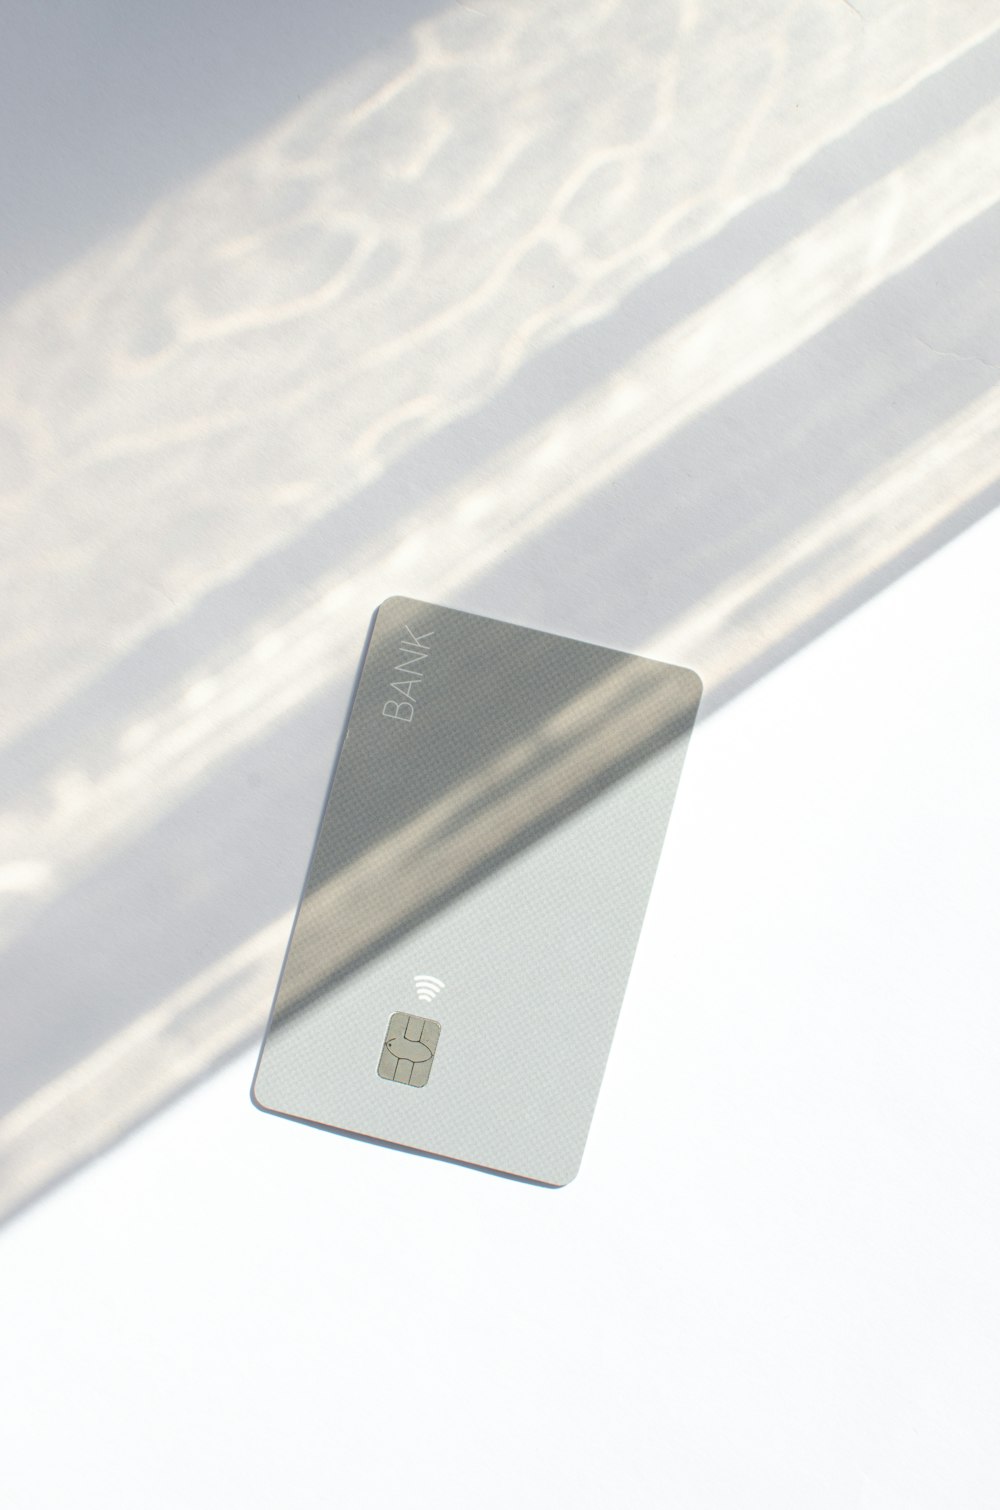 a silver credit card sitting on top of a table